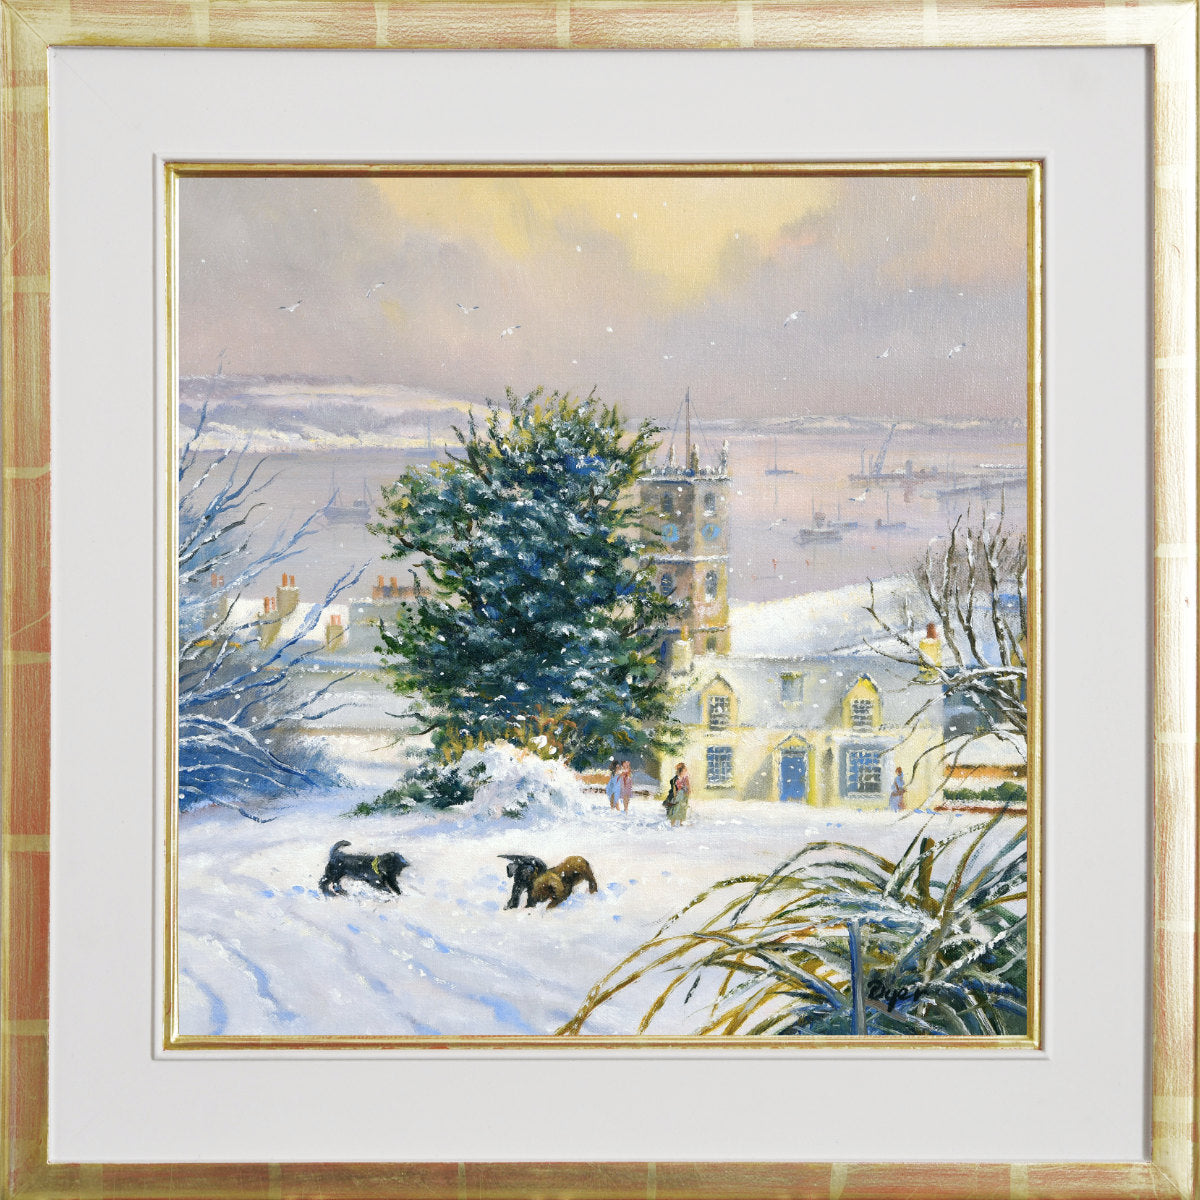 &#39;Puppies Playing in the Snow. Falmouth&#39;, 14 x 14 inches original art oil on canvas. Paintings of Cornwall by Cornish Artist Ted Dyer from our Cornwall Art Gallery